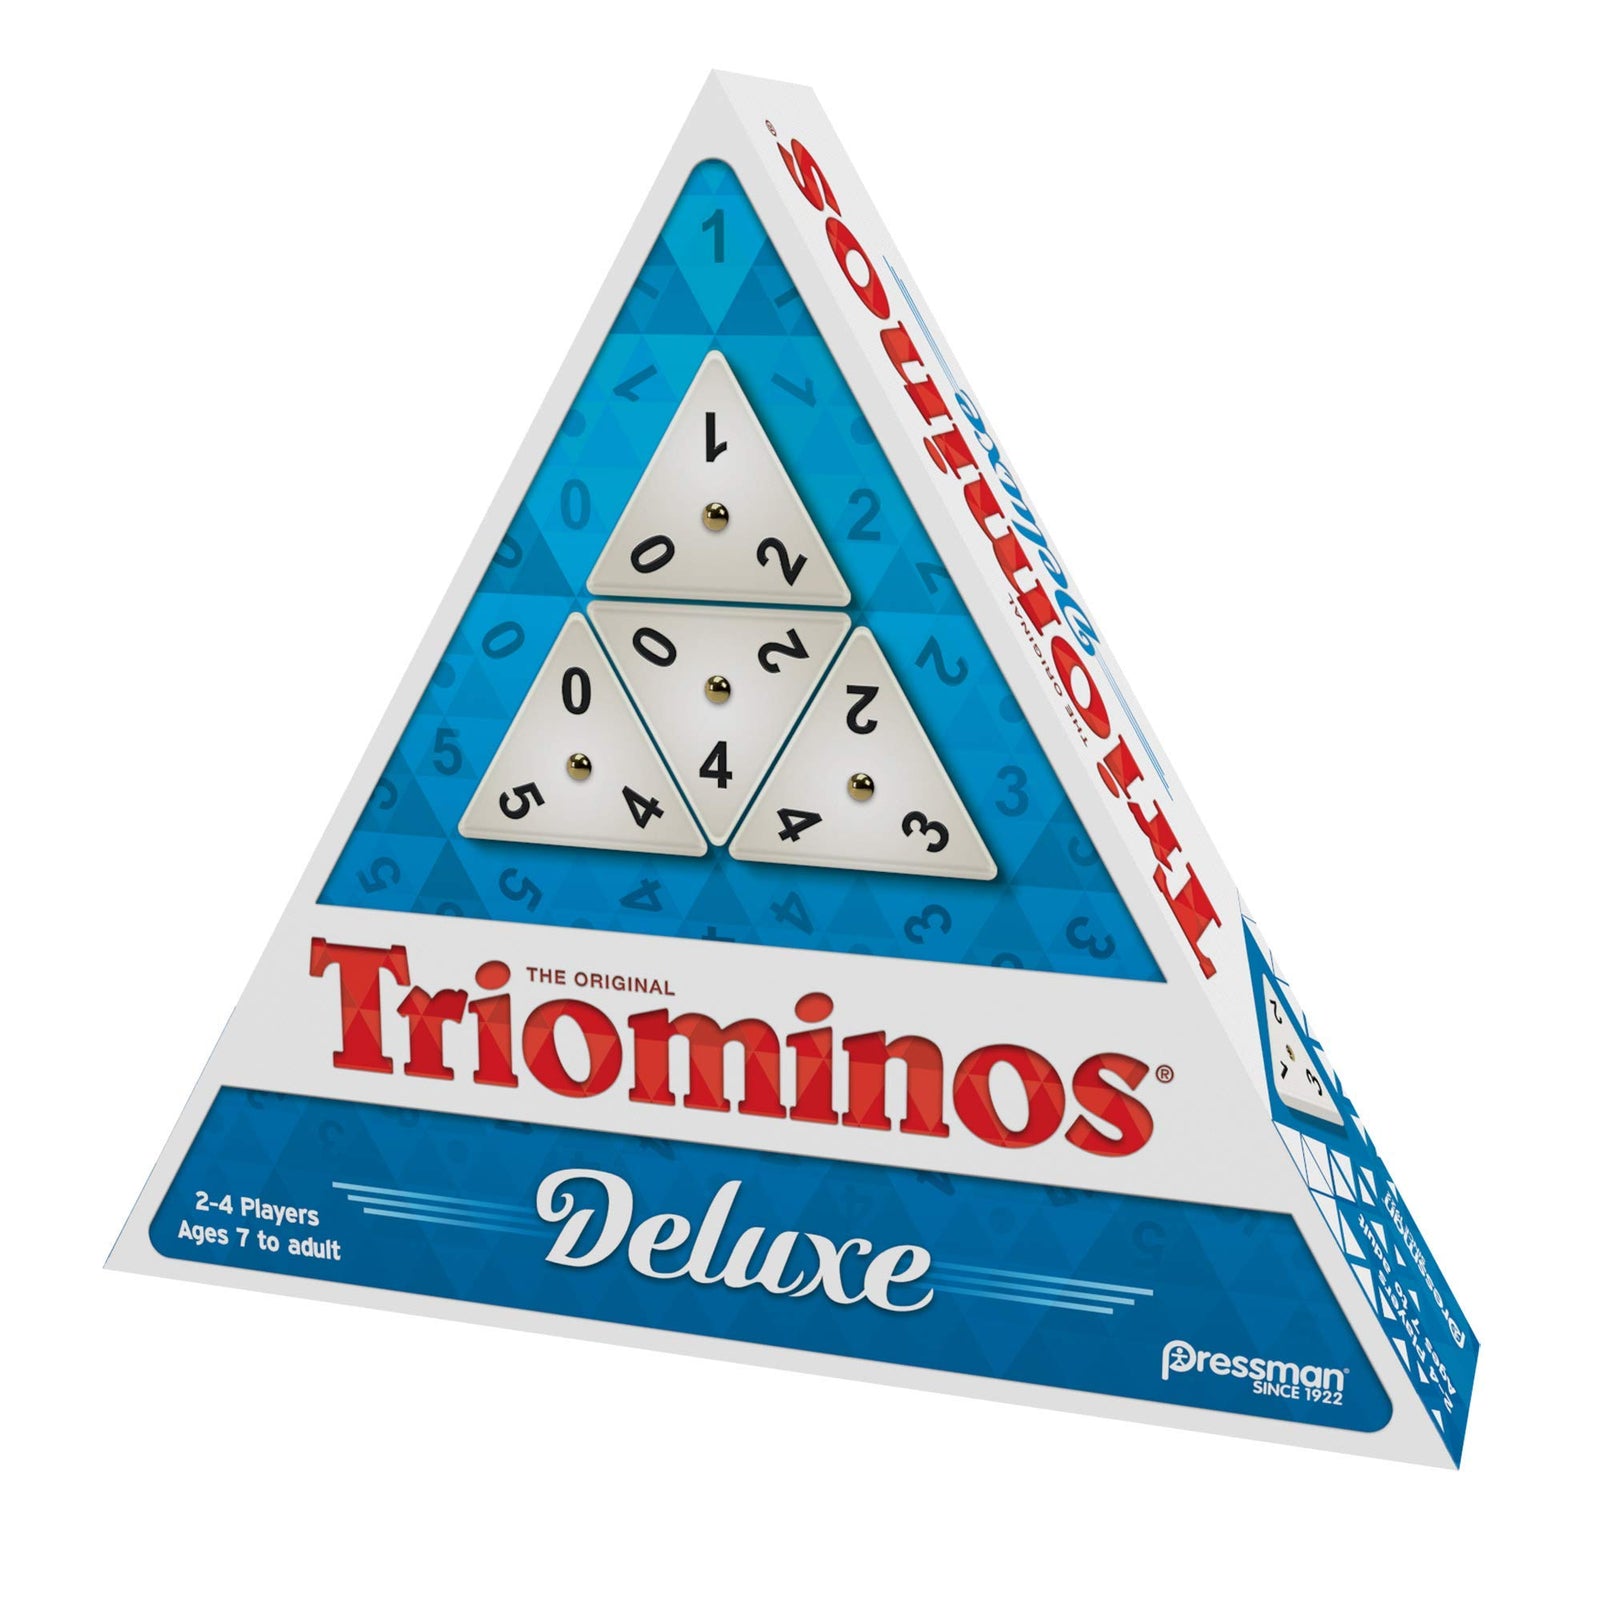 Pressman Tri-Ominos - Deluxe Edition Triangular Tiles with Brass Spinners